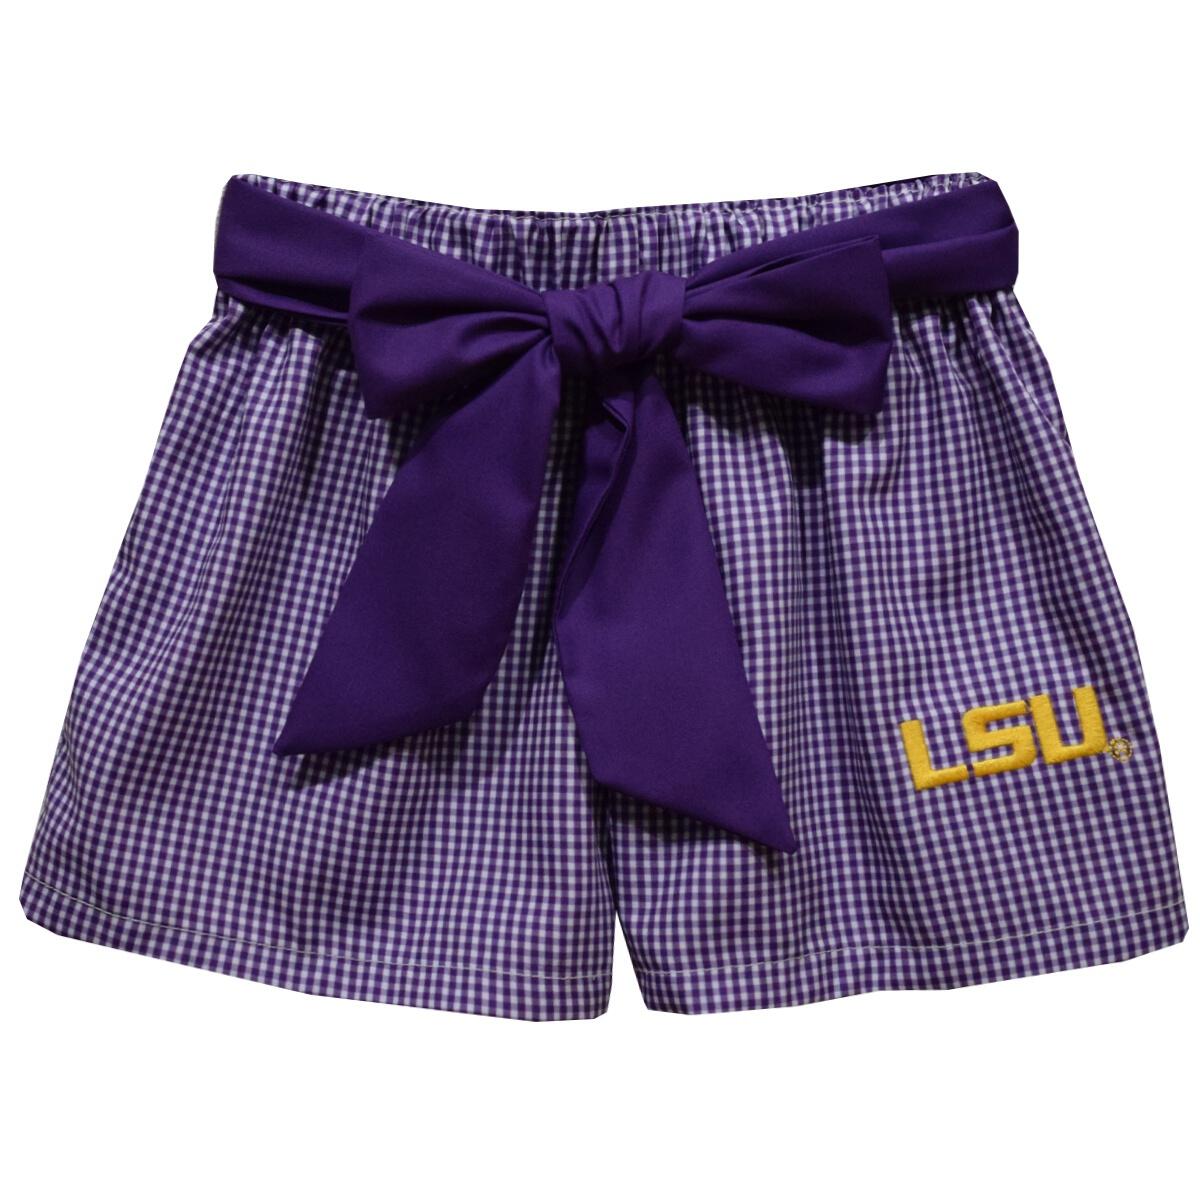 LSU Tigers Embroidered Purple Gingham Girls Short with Sash